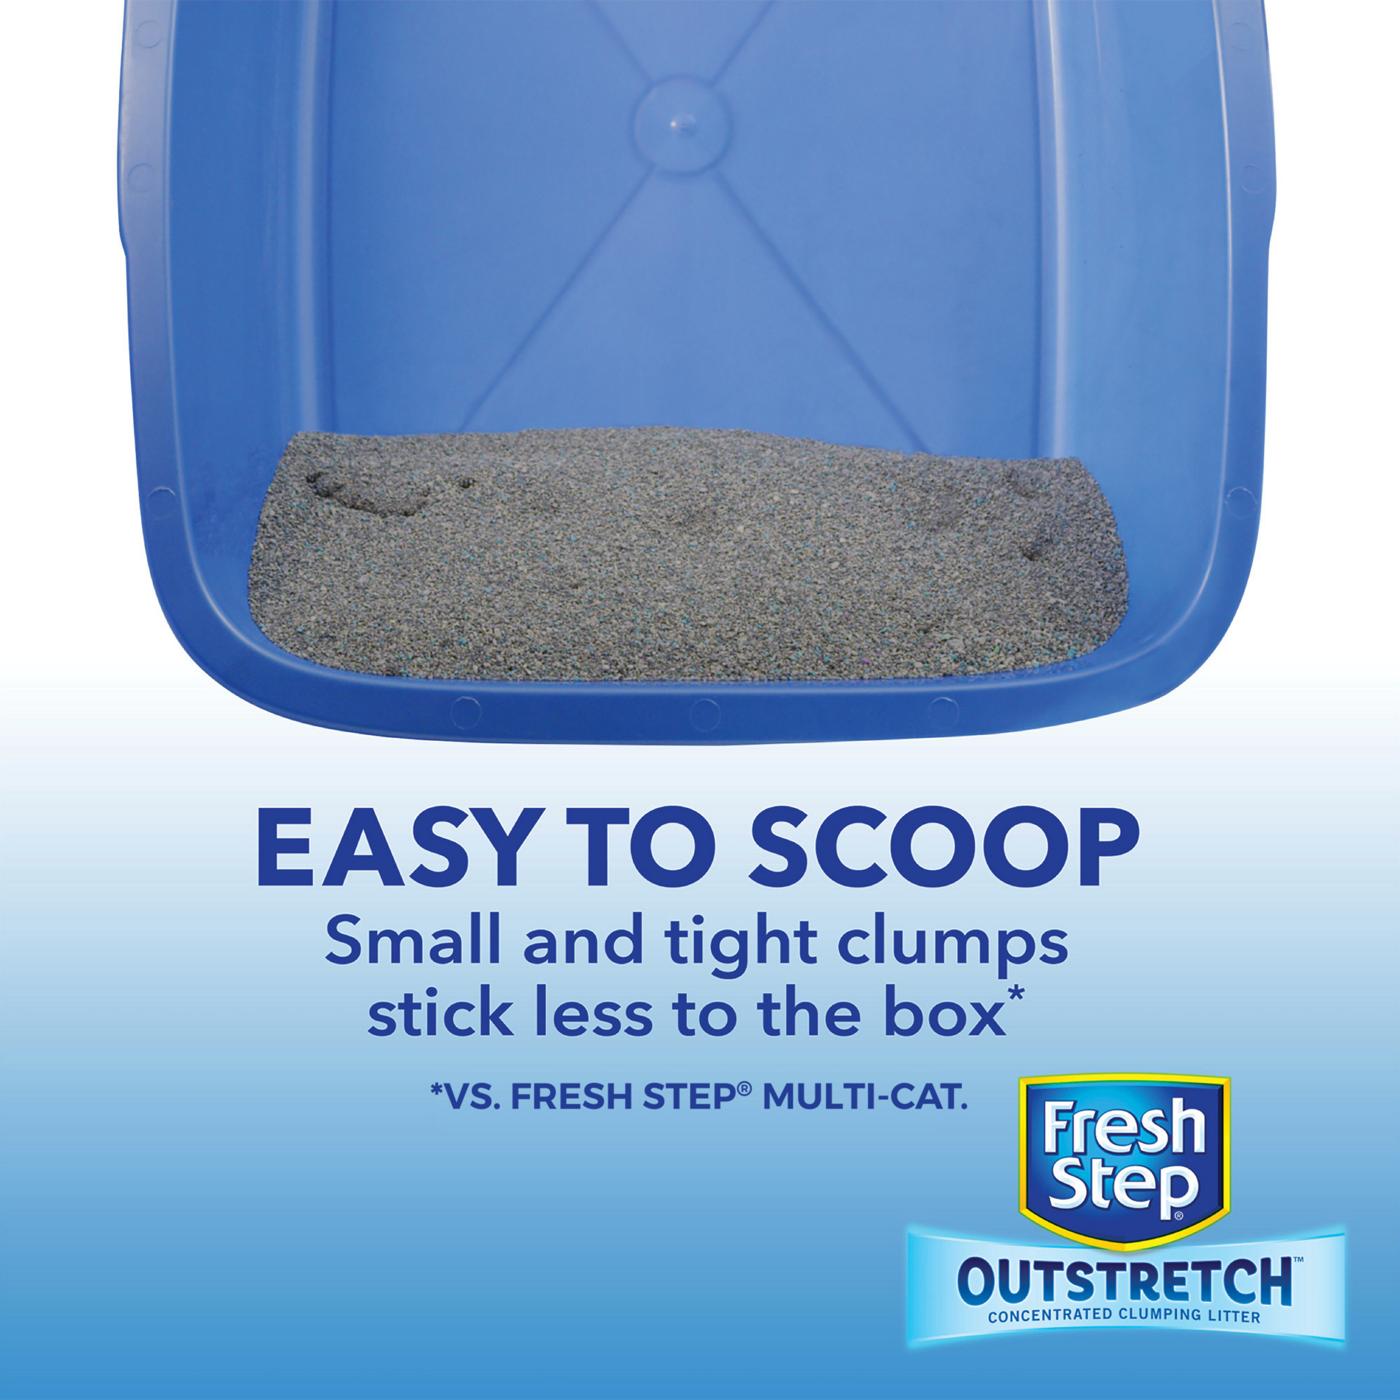 Fresh Step Outstretch Unscented Concentrated Clumping Cat Litter; image 6 of 6